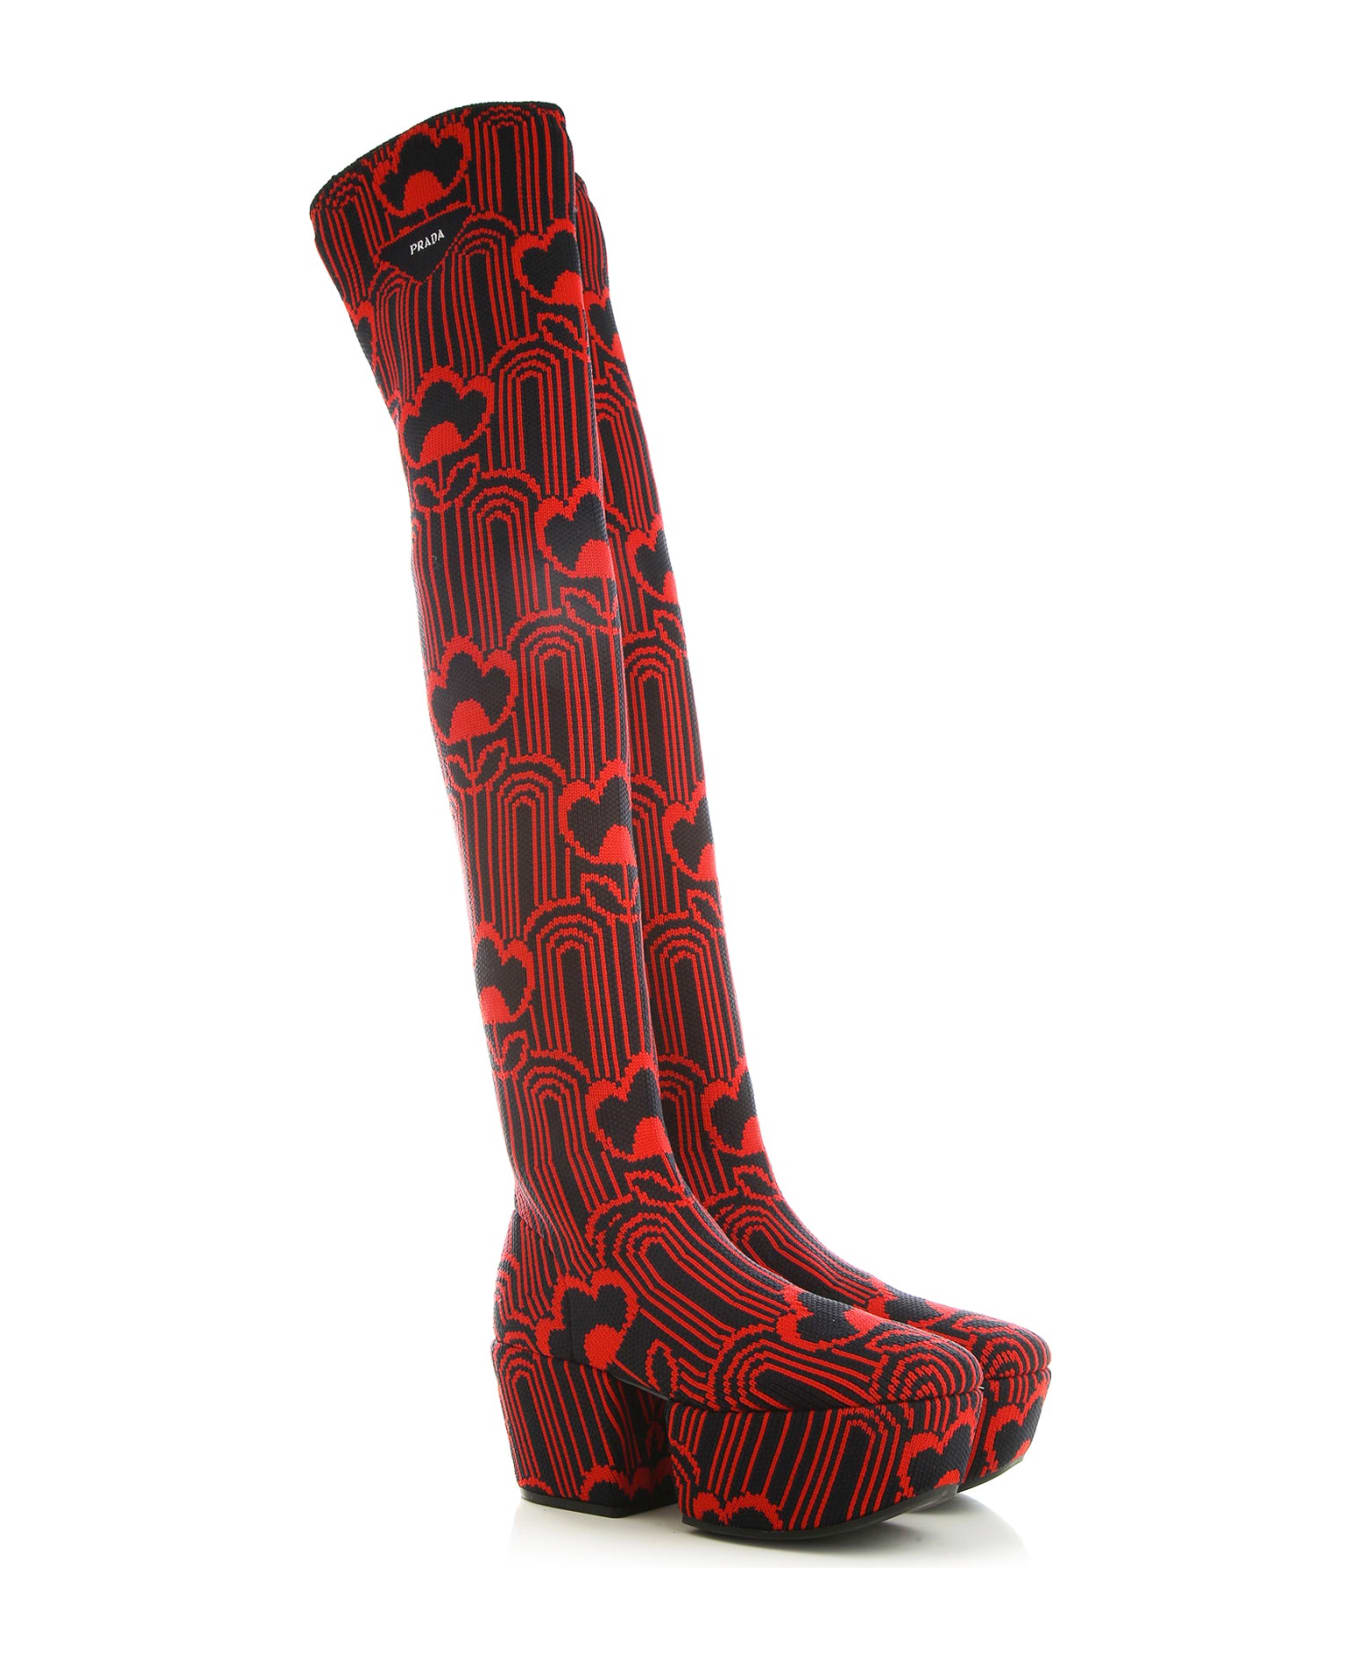 Prada Jaquard Embroidered Boots - Red